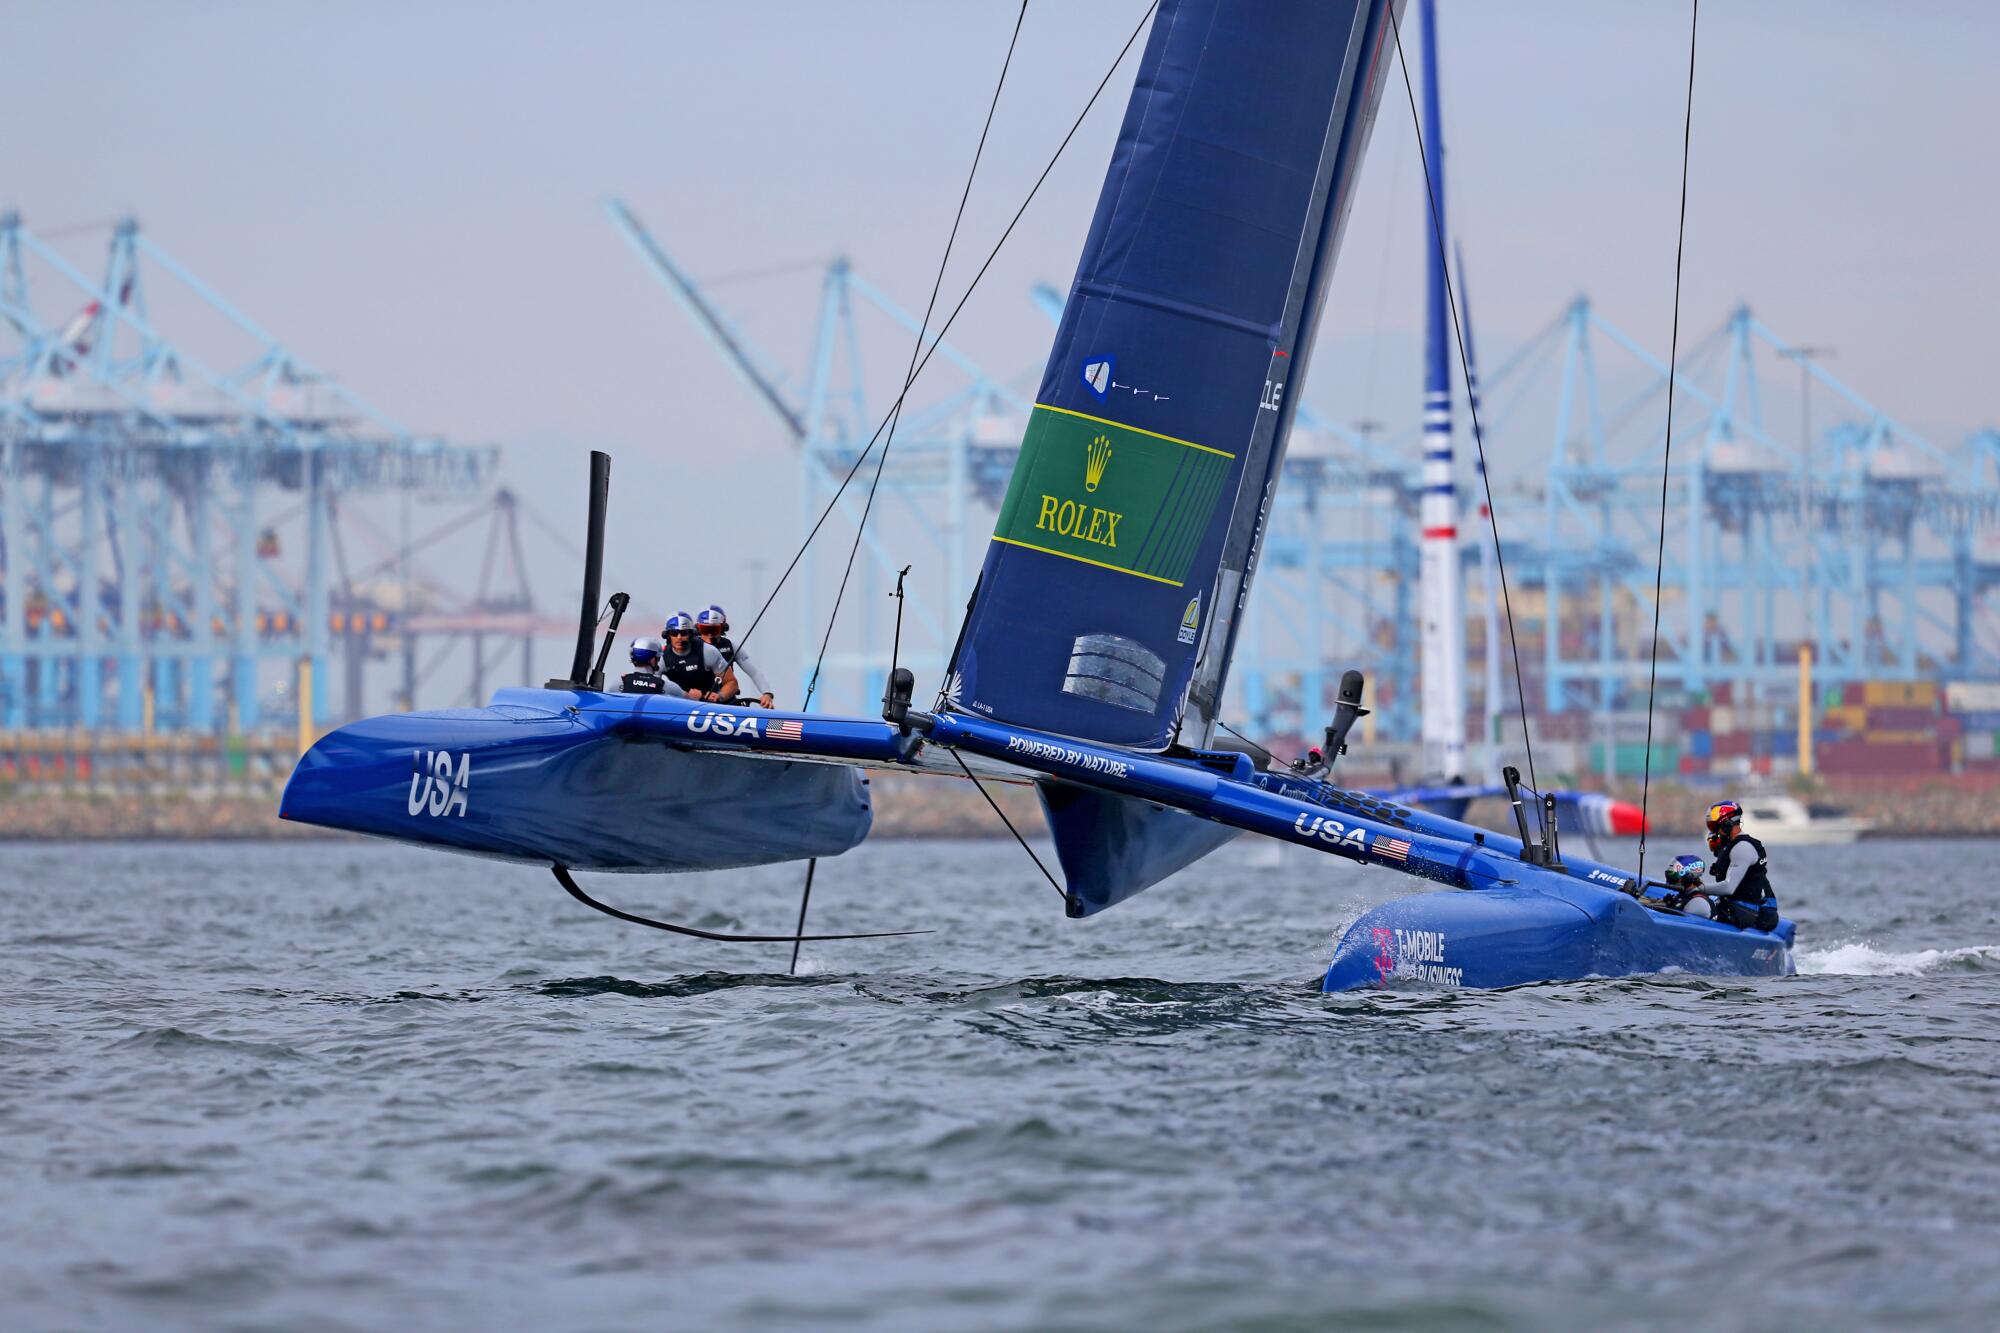 The United States of America in the Oracle Los Angeles Sail Grand Prix at the P